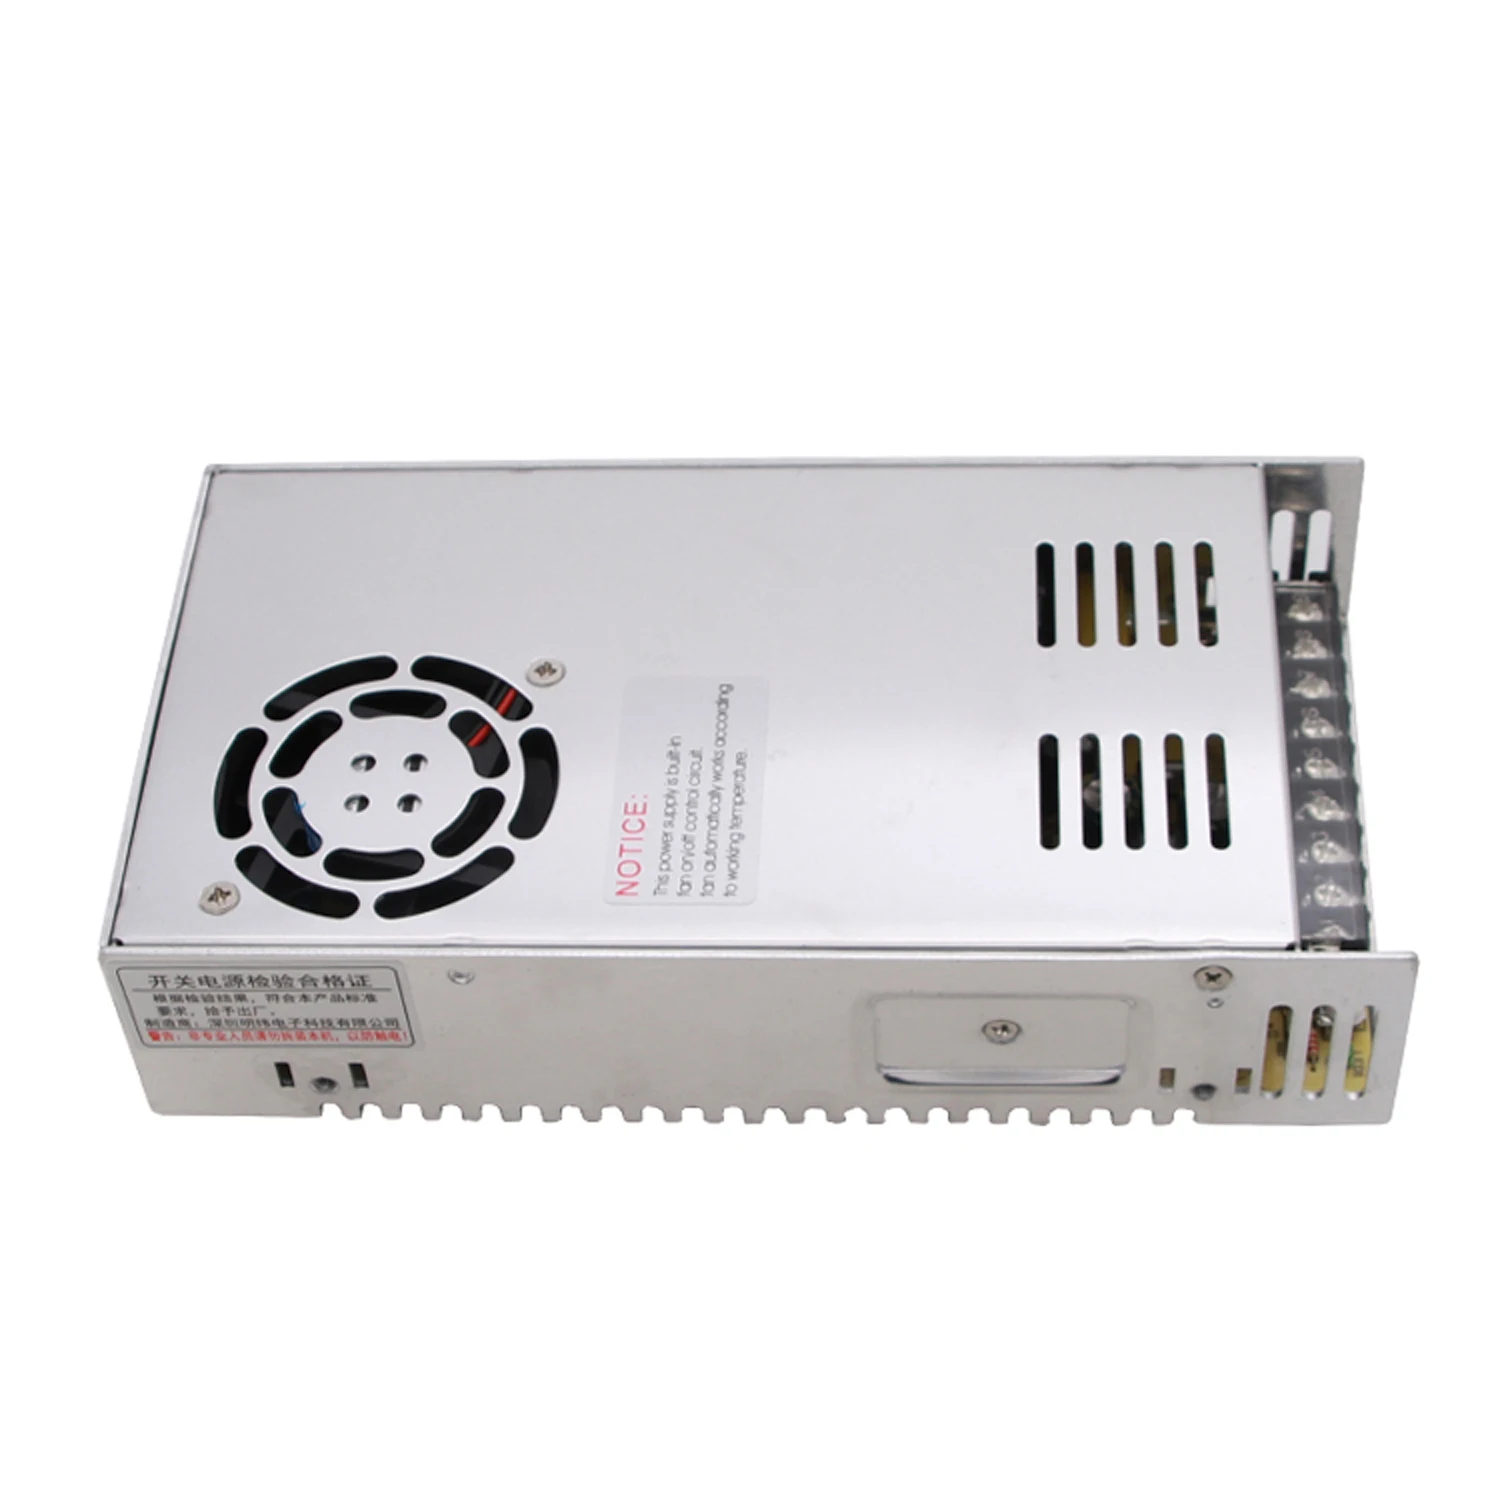 

400W 60V Switch DC Power Supply S-400-60 6.6A Single Output for CNC Router Foaming Mill Cut Engraver Plasma